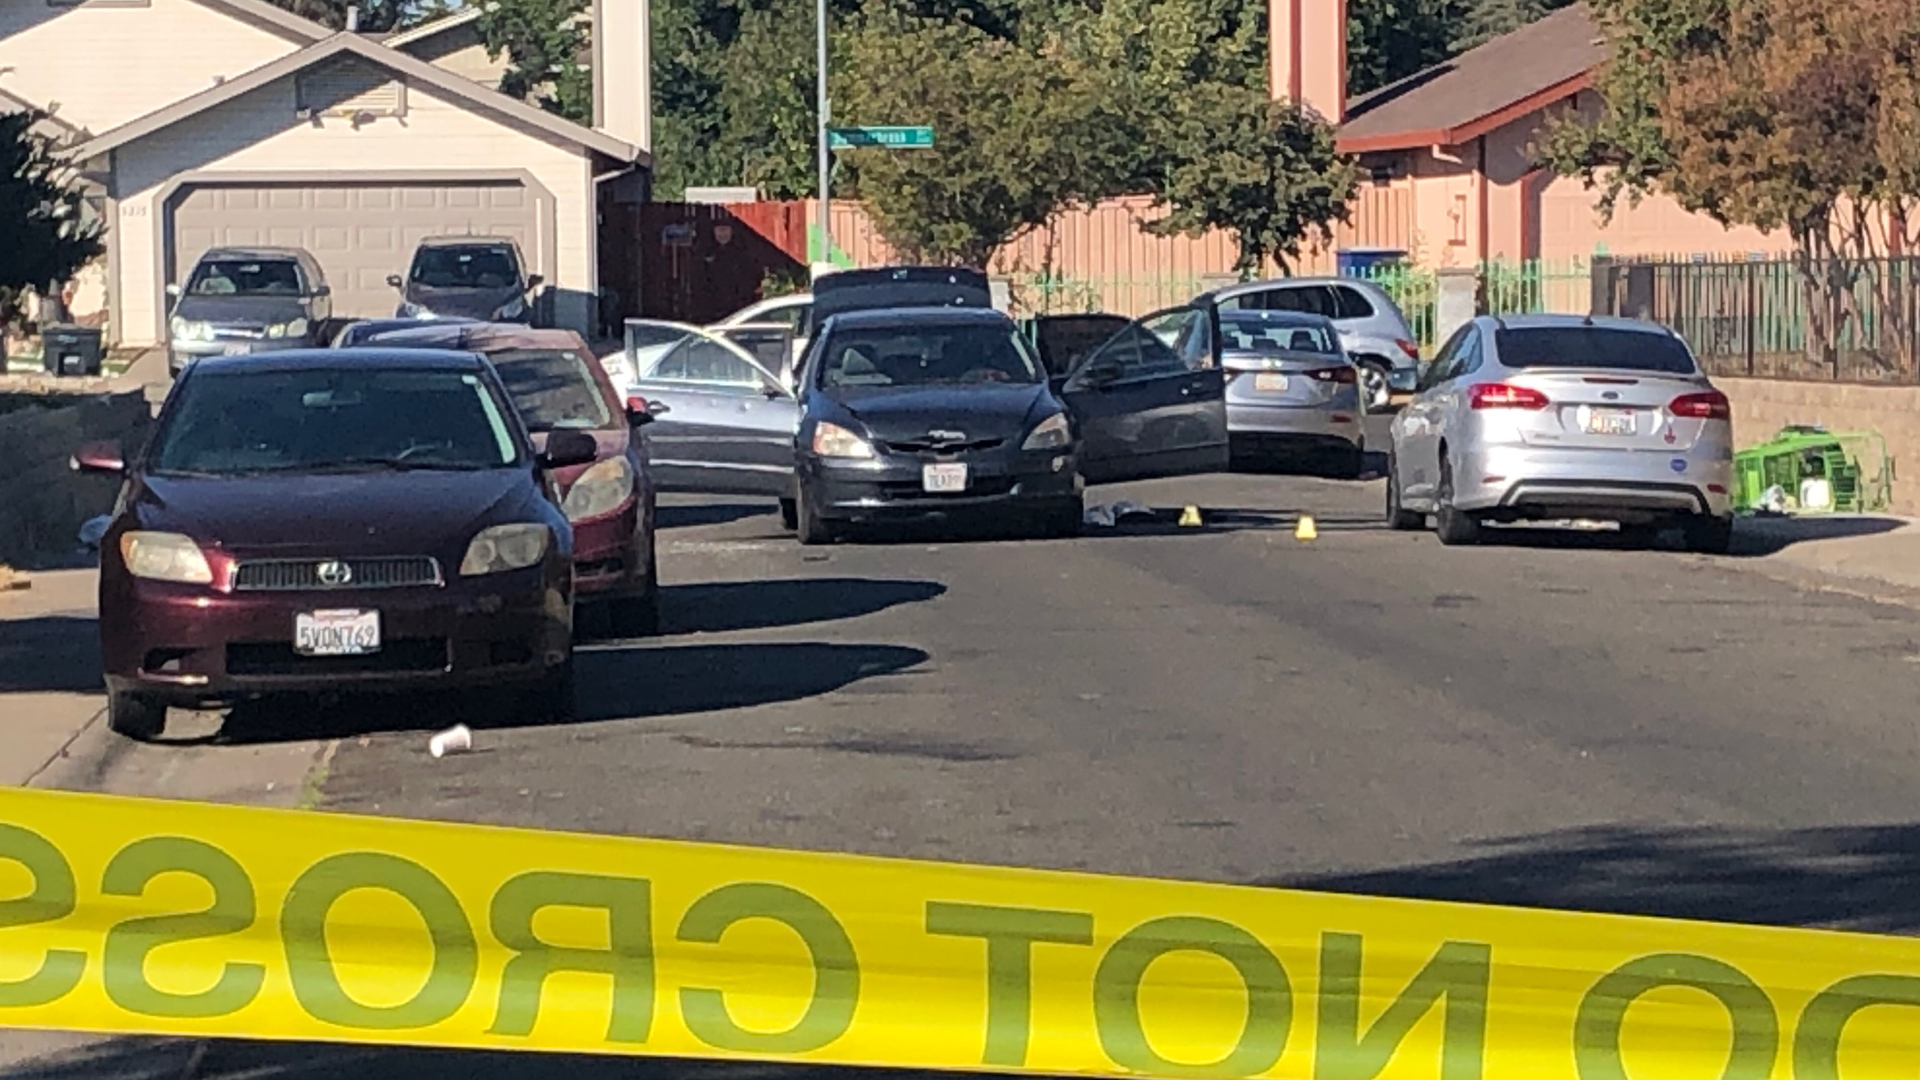 The Sacramento Police Department is investigating a homicide that happened in a Valley Hi neighborhood along Summberbrook Way.